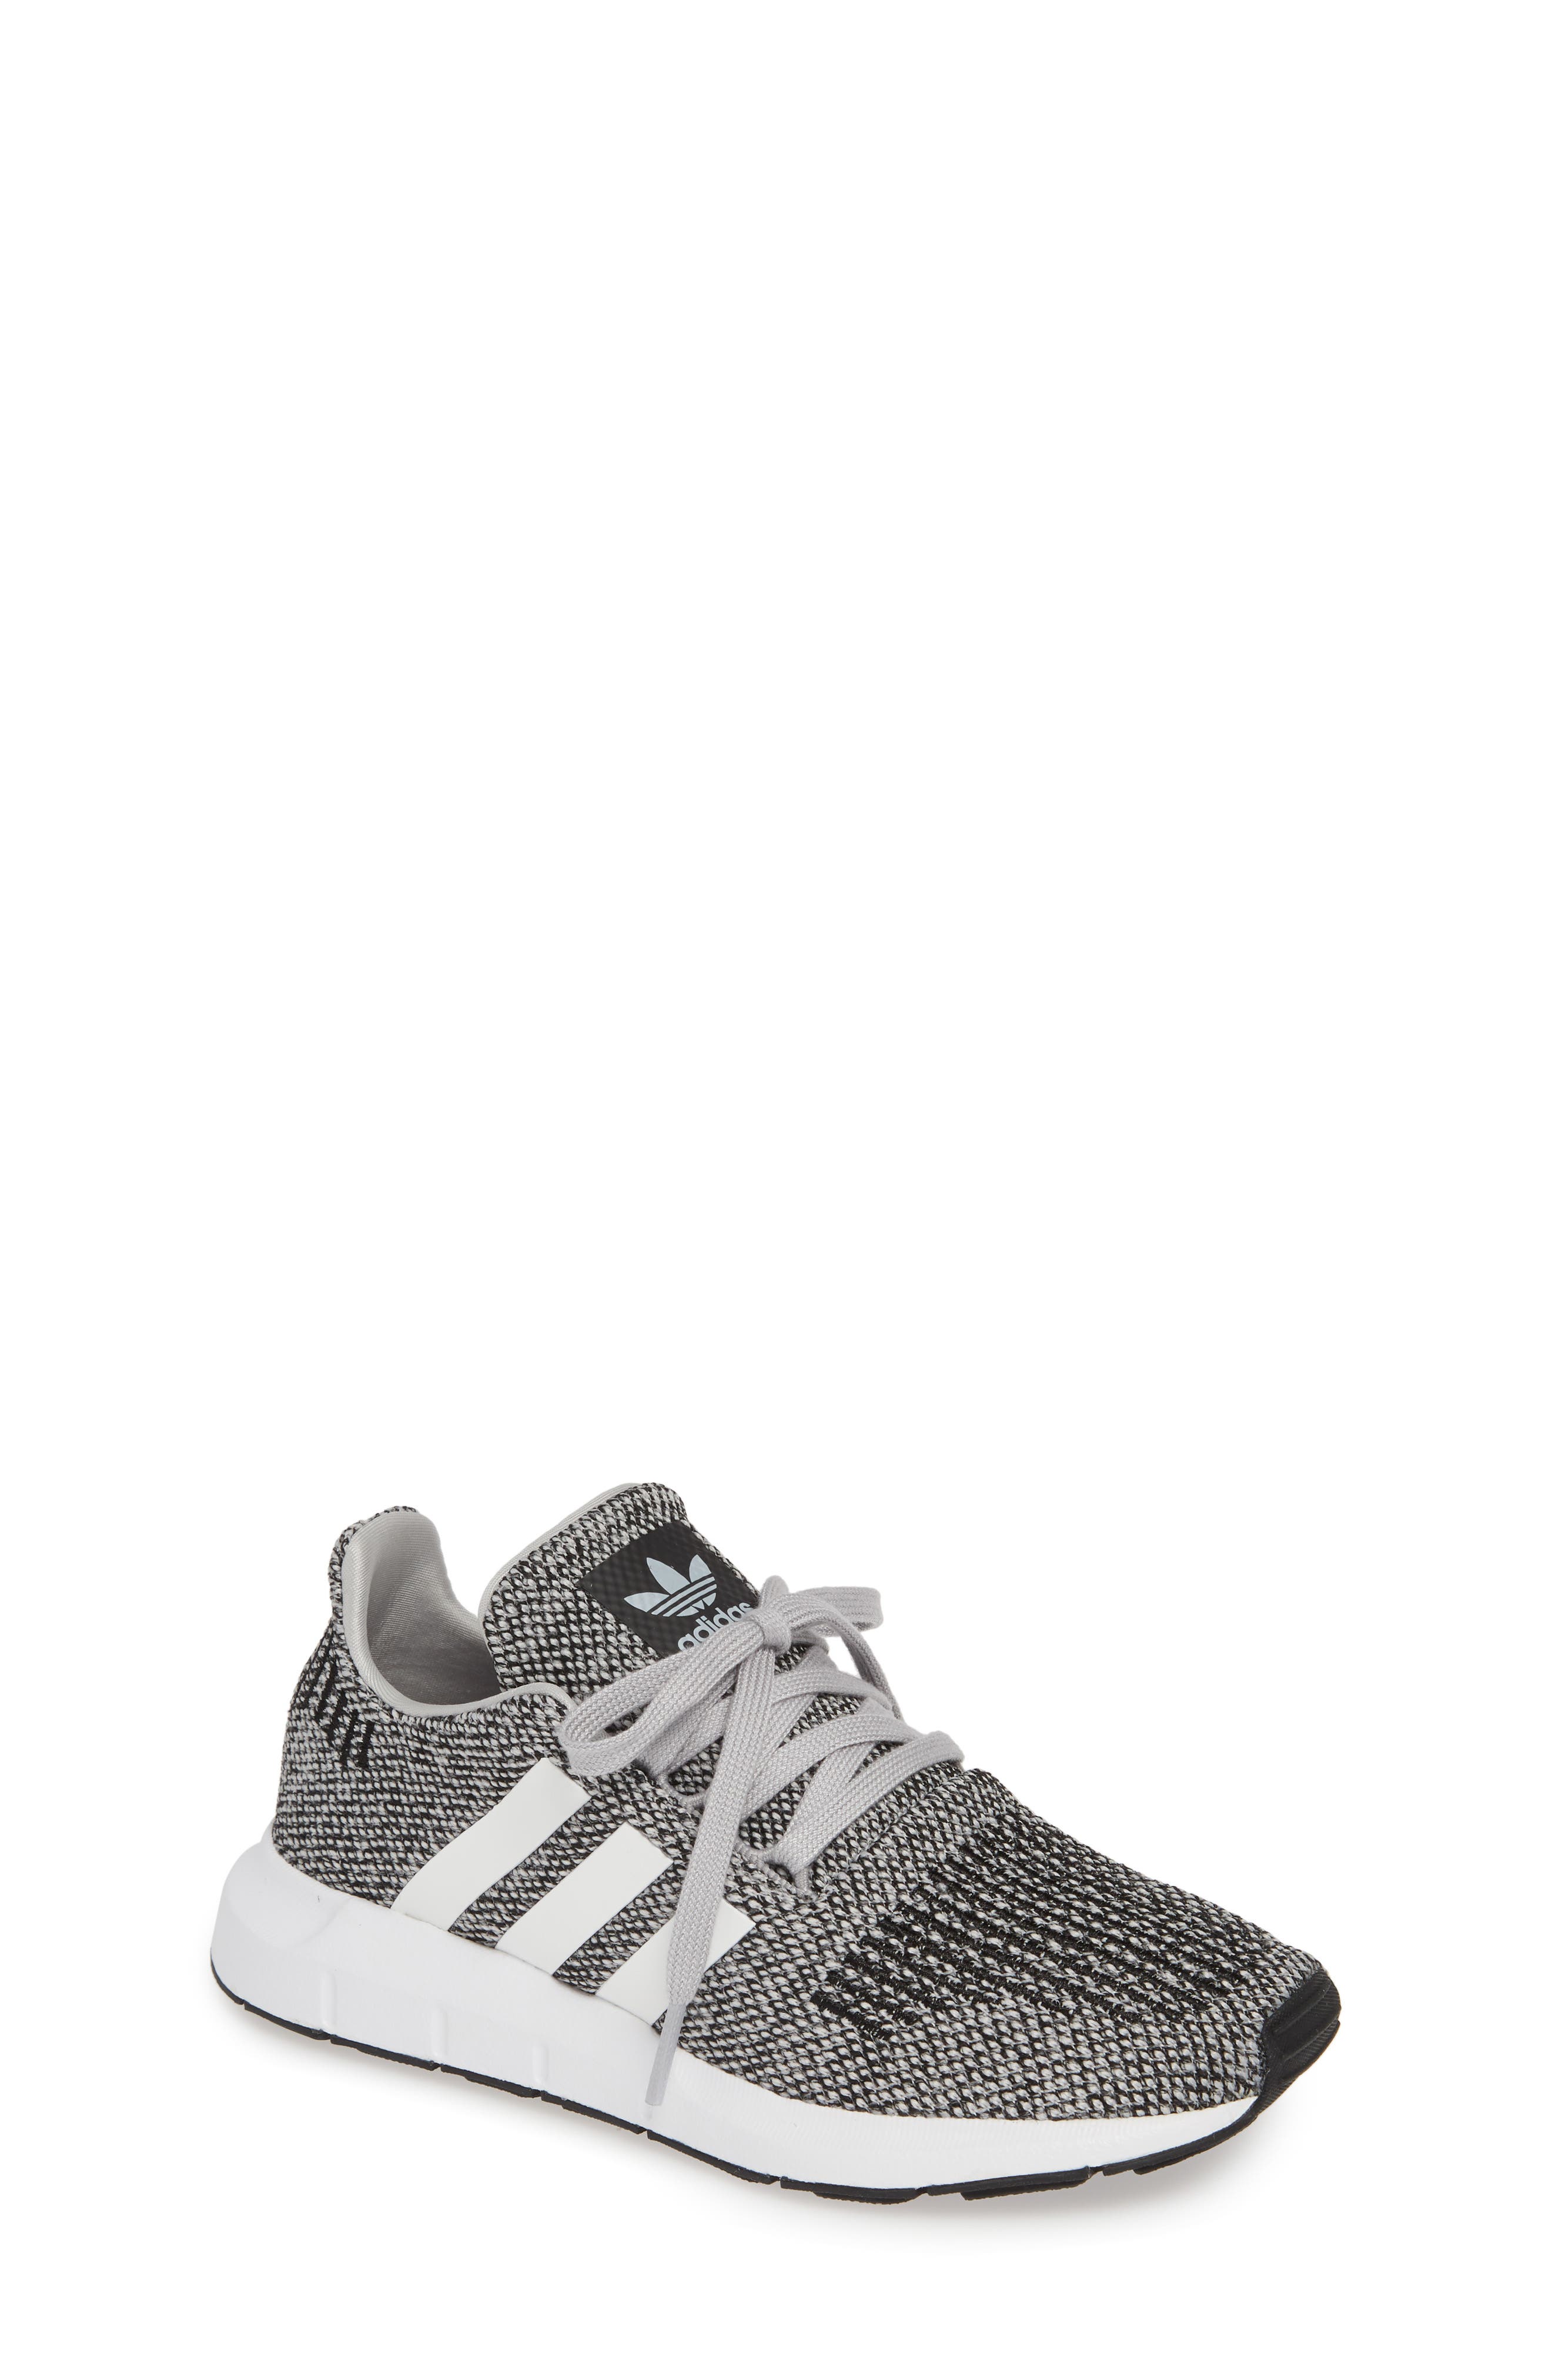 adidas neo toddler shoes